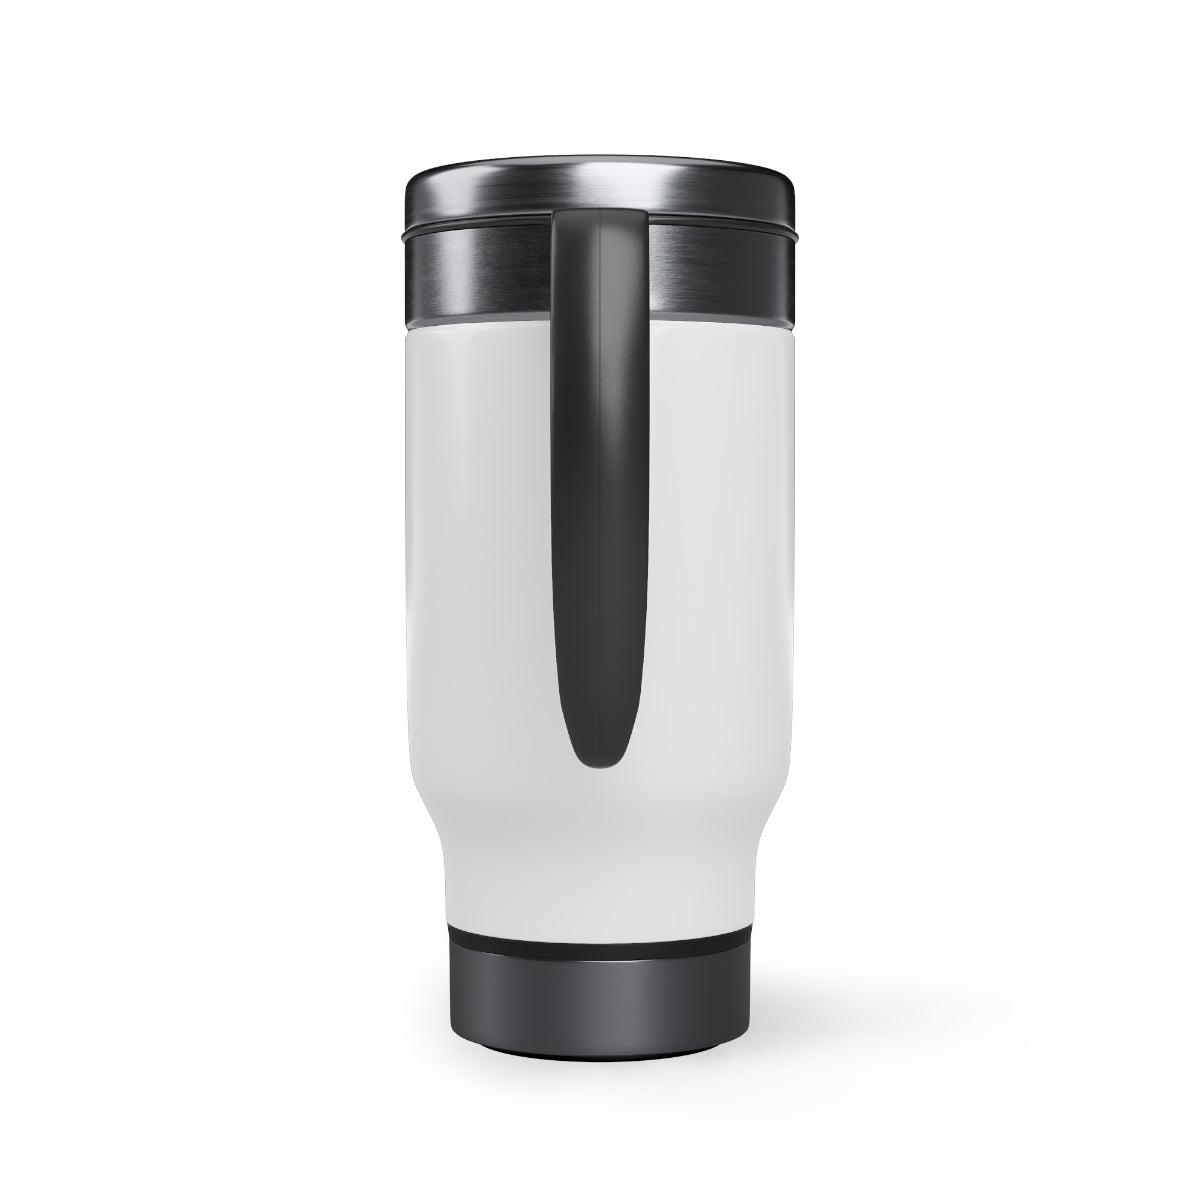 You Are Fearless! Stainless Steel Travel Mug with Handle, 14oz